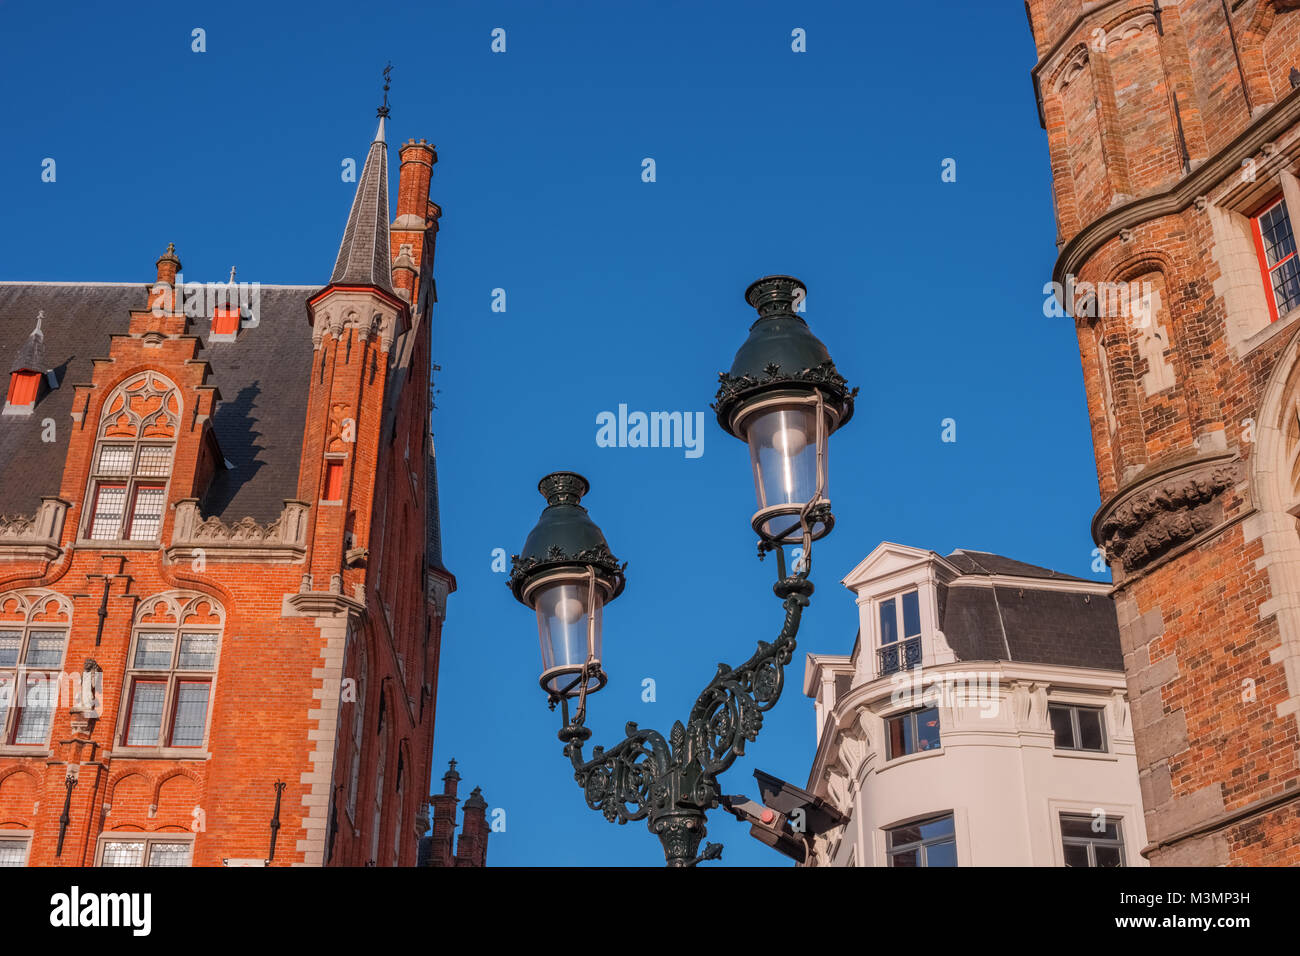 Street with old houses, lantern, Bruges, Belgium. Traditional Flemish medieval architecture in historic town centre. Brick houses in center of city. T Stock Photo